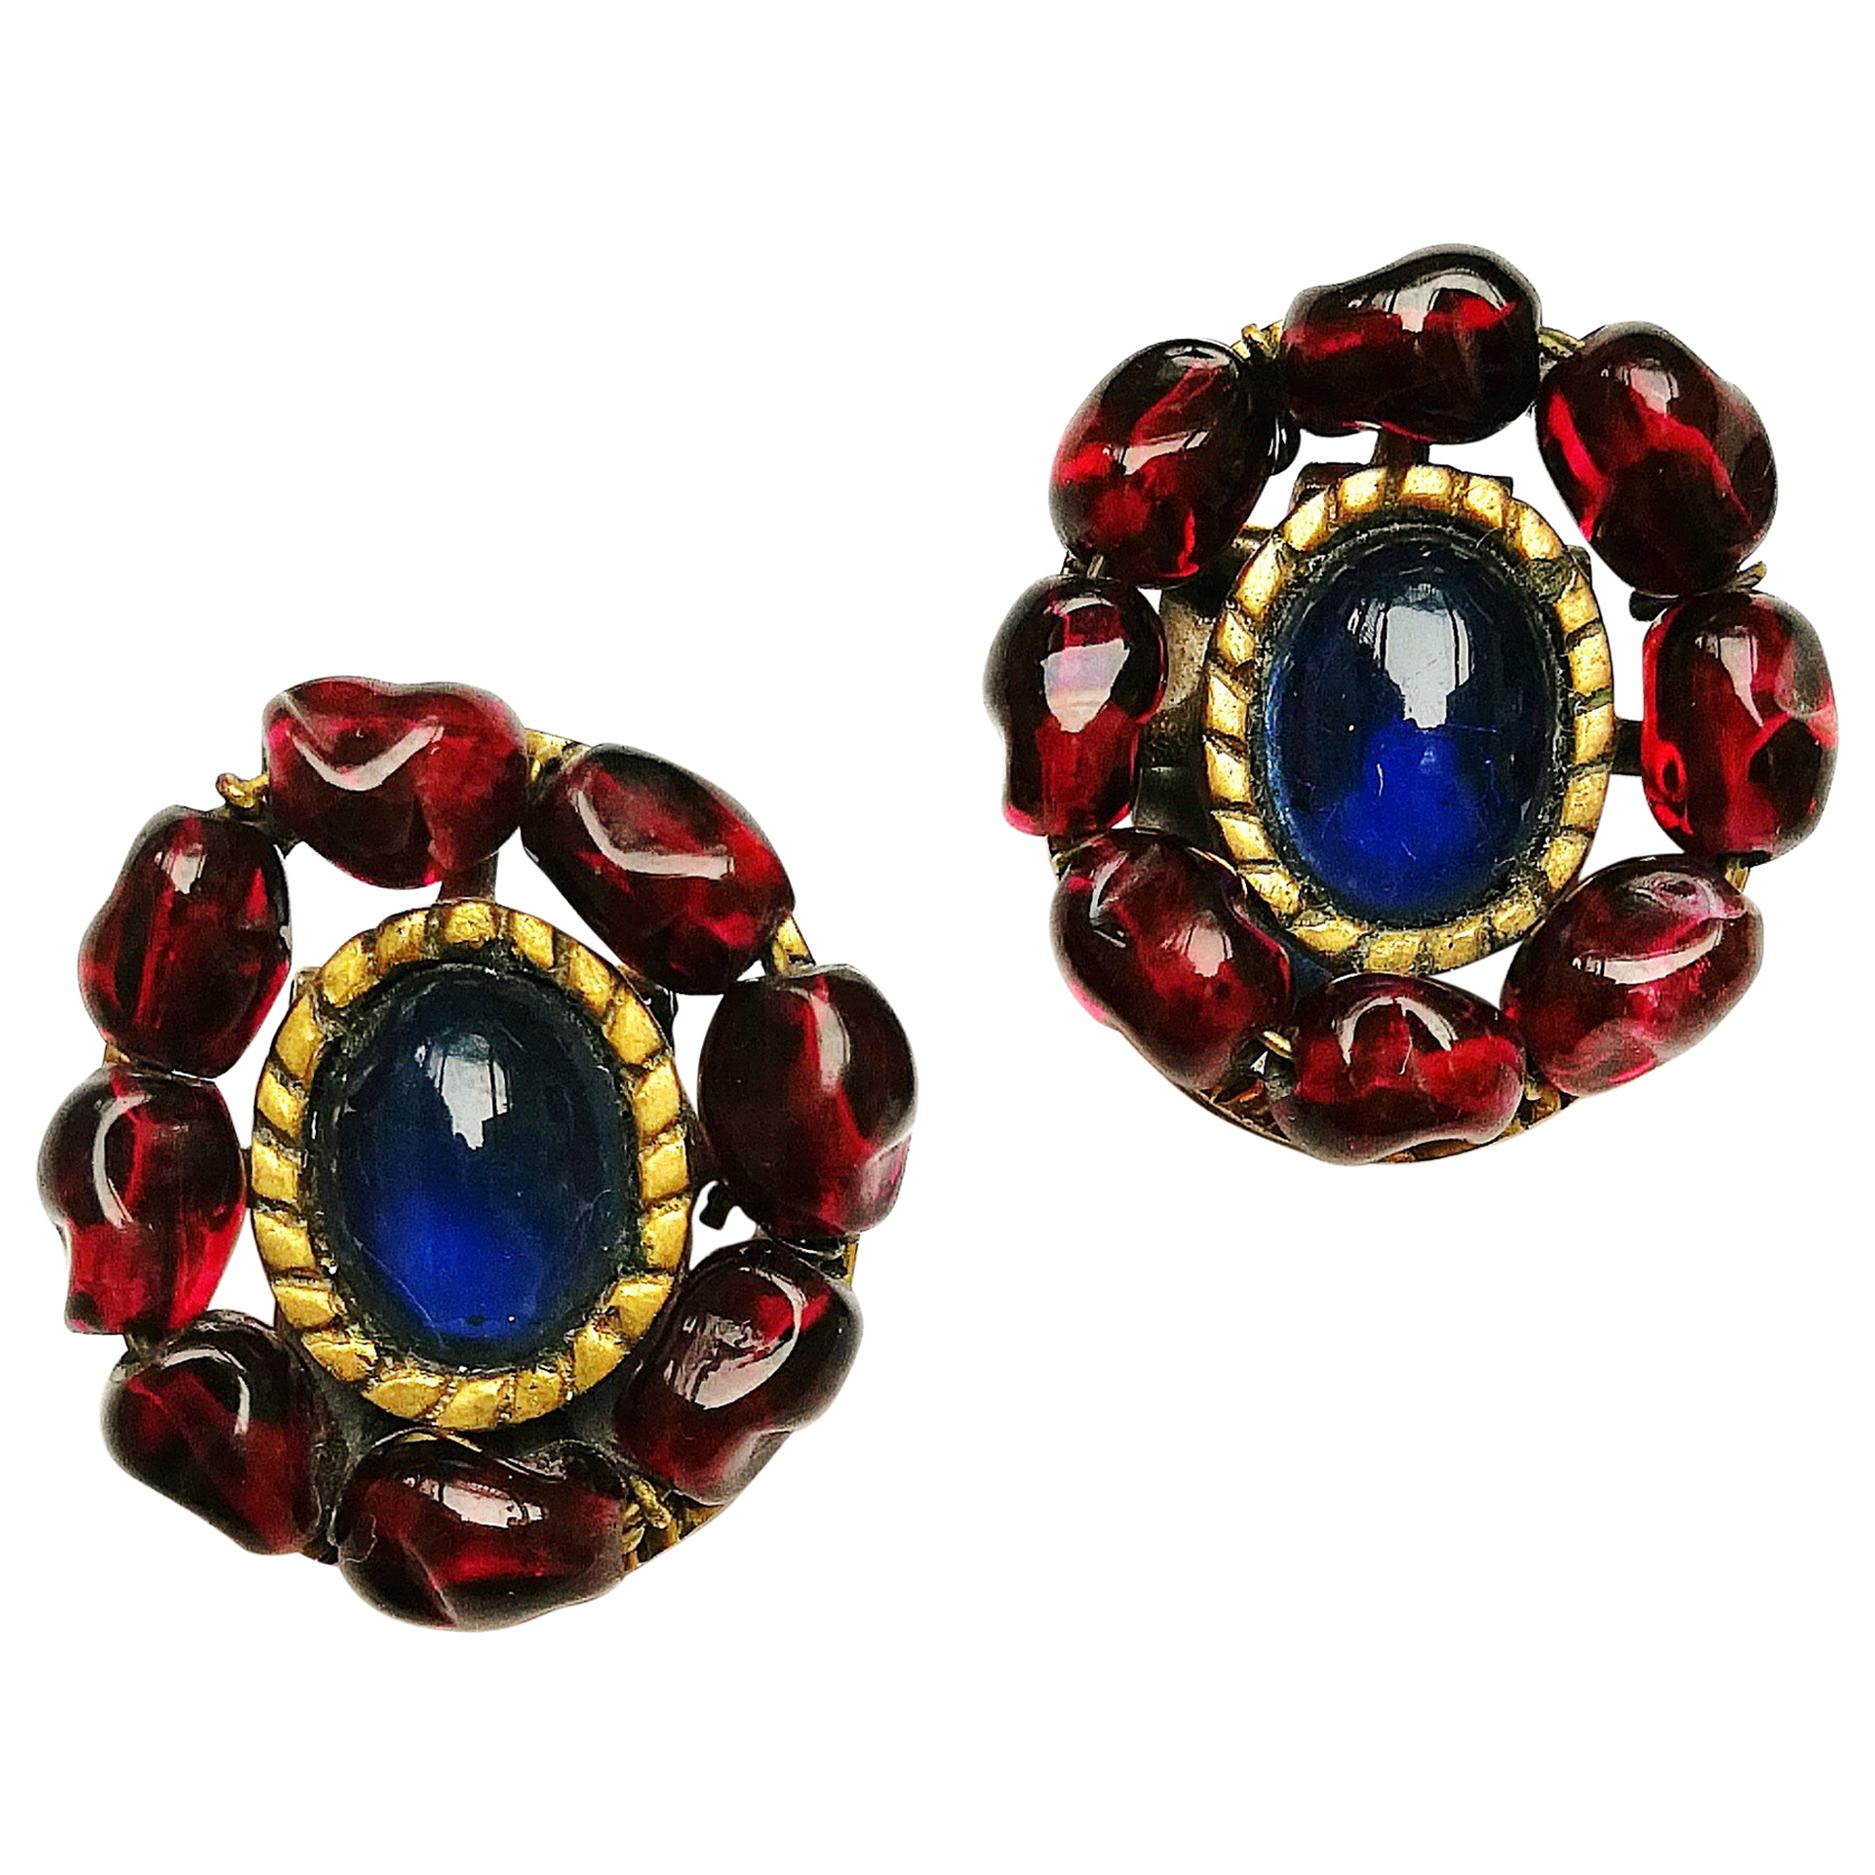 Ruby and sapphire poured glass earrings, att. Maison Gripoix for Chanel, 1930s.